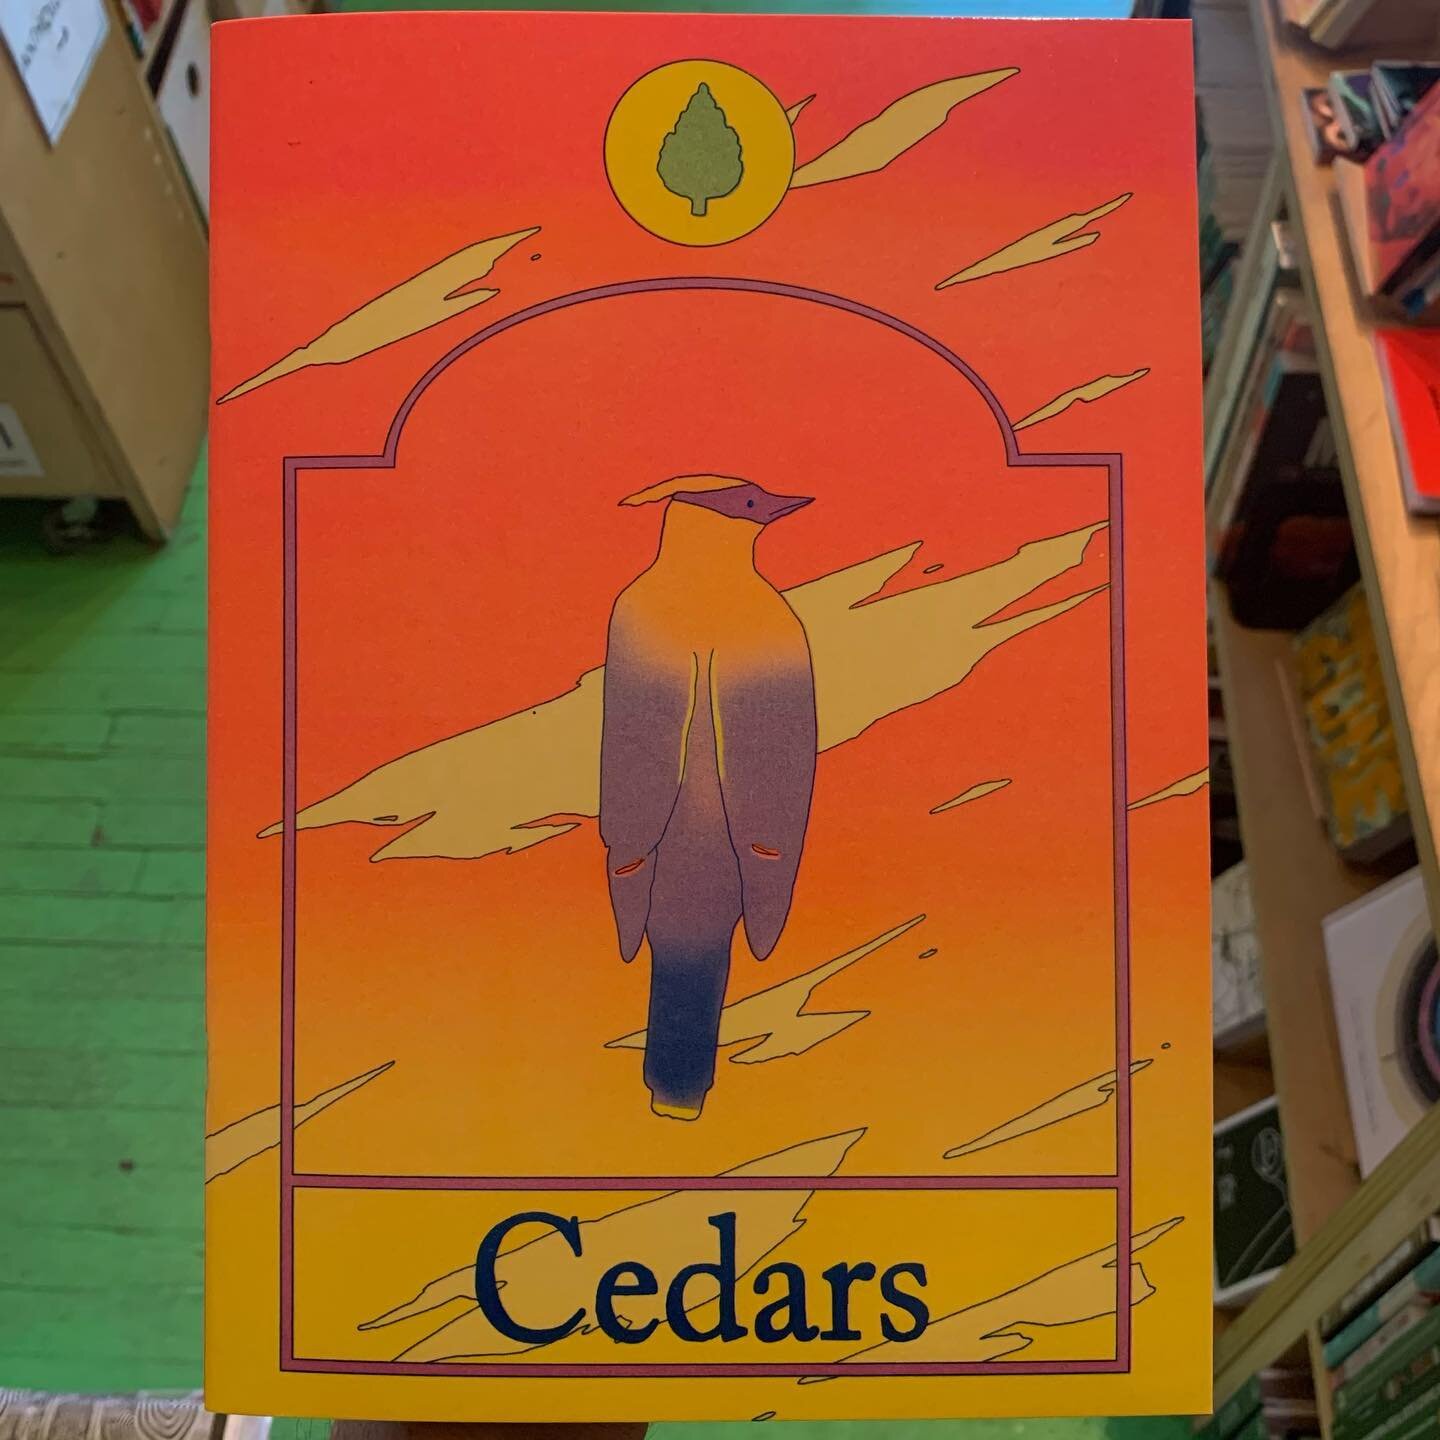 Gorgeous new Maria Medem book, available exclusively with new Field Works &ldquo;Cedars&rdquo; album. Brainchild of Stuart Hyatt , Cedars combines cosmic Americana with Western ambient and Middle Eastern influences, set to Arabic and English poetry @